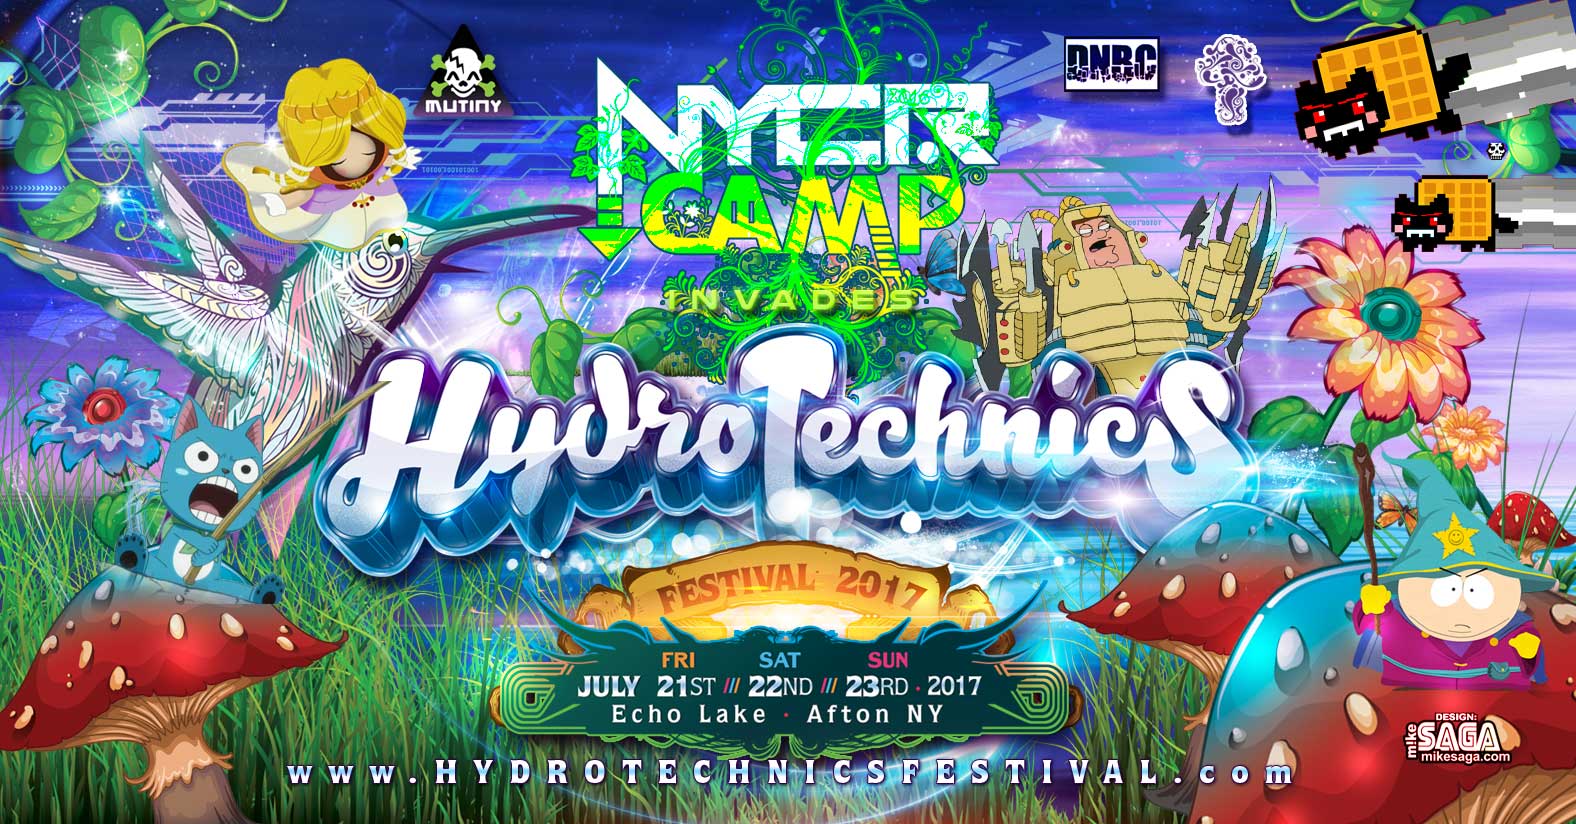 NYCR Camp at Hydrotechnics Festival 2017